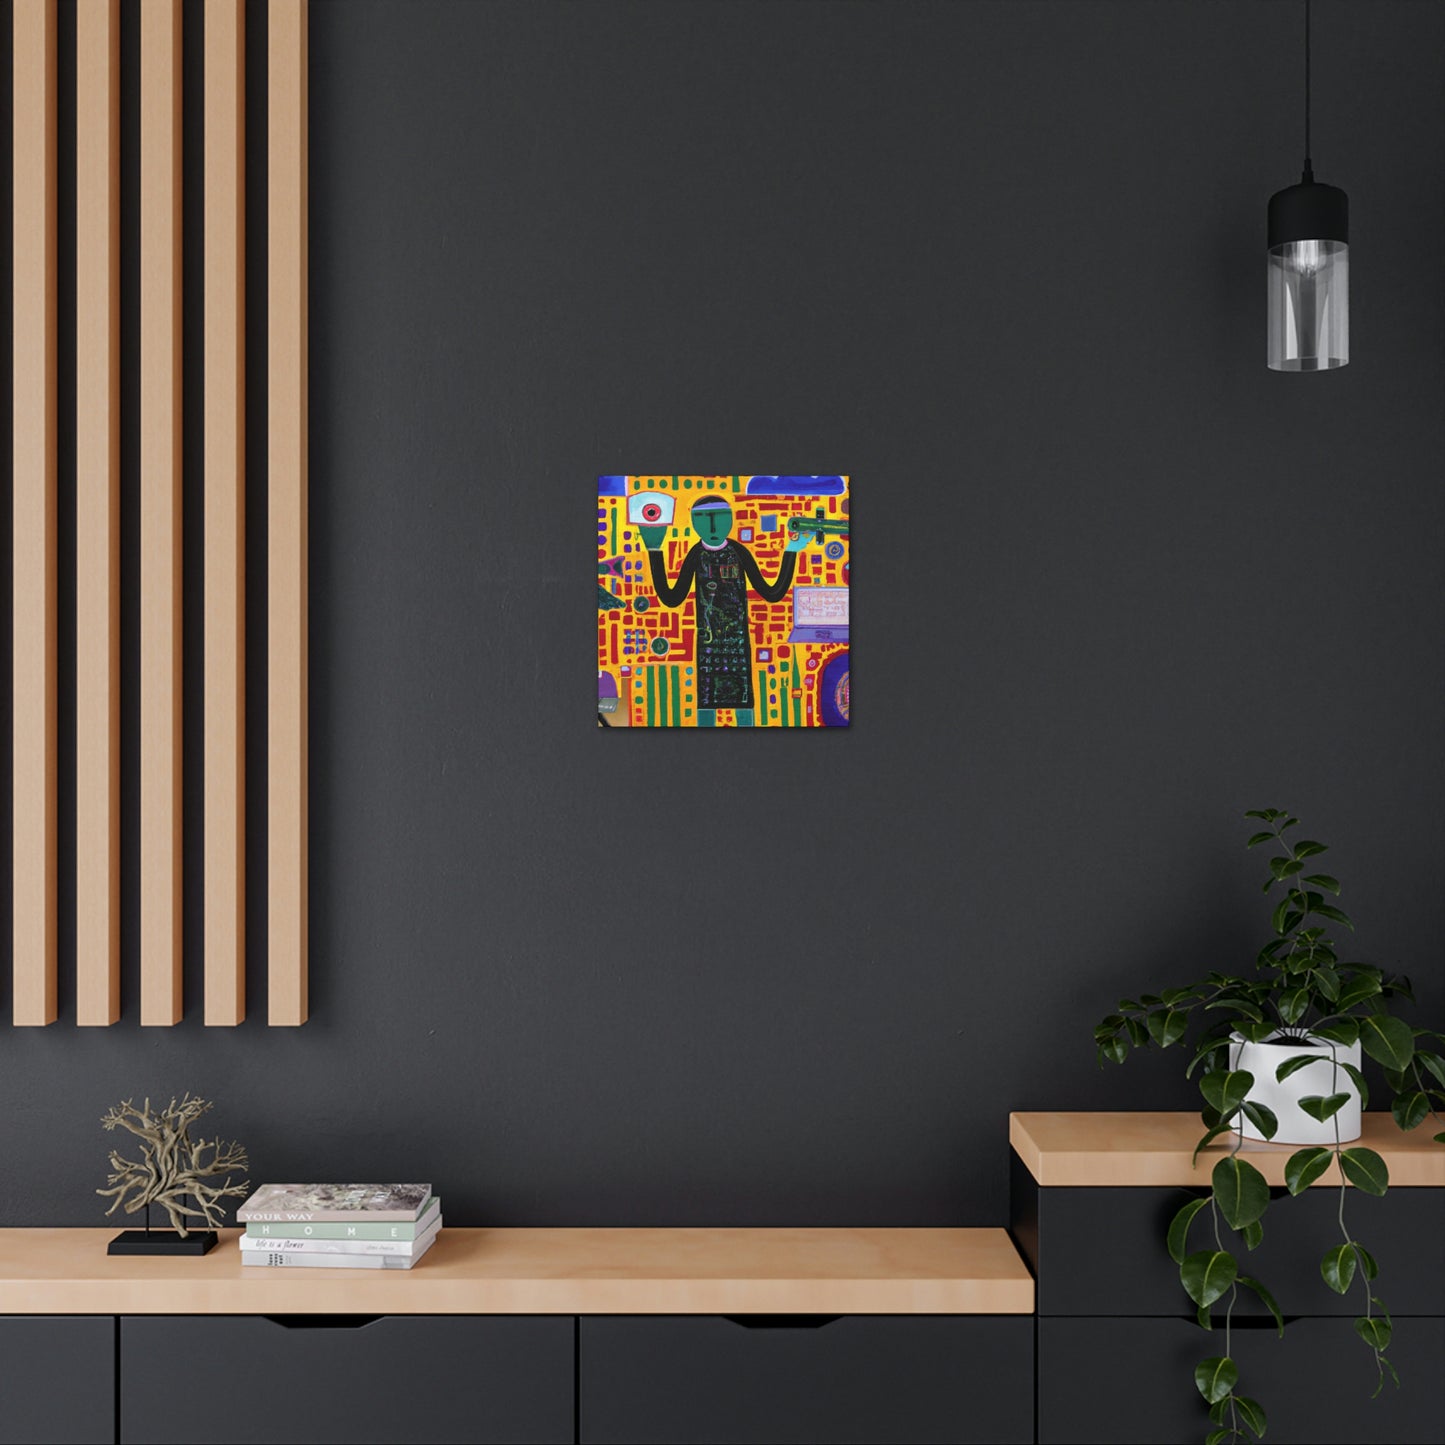 "Cybersecurity in Artwork" - Canvas